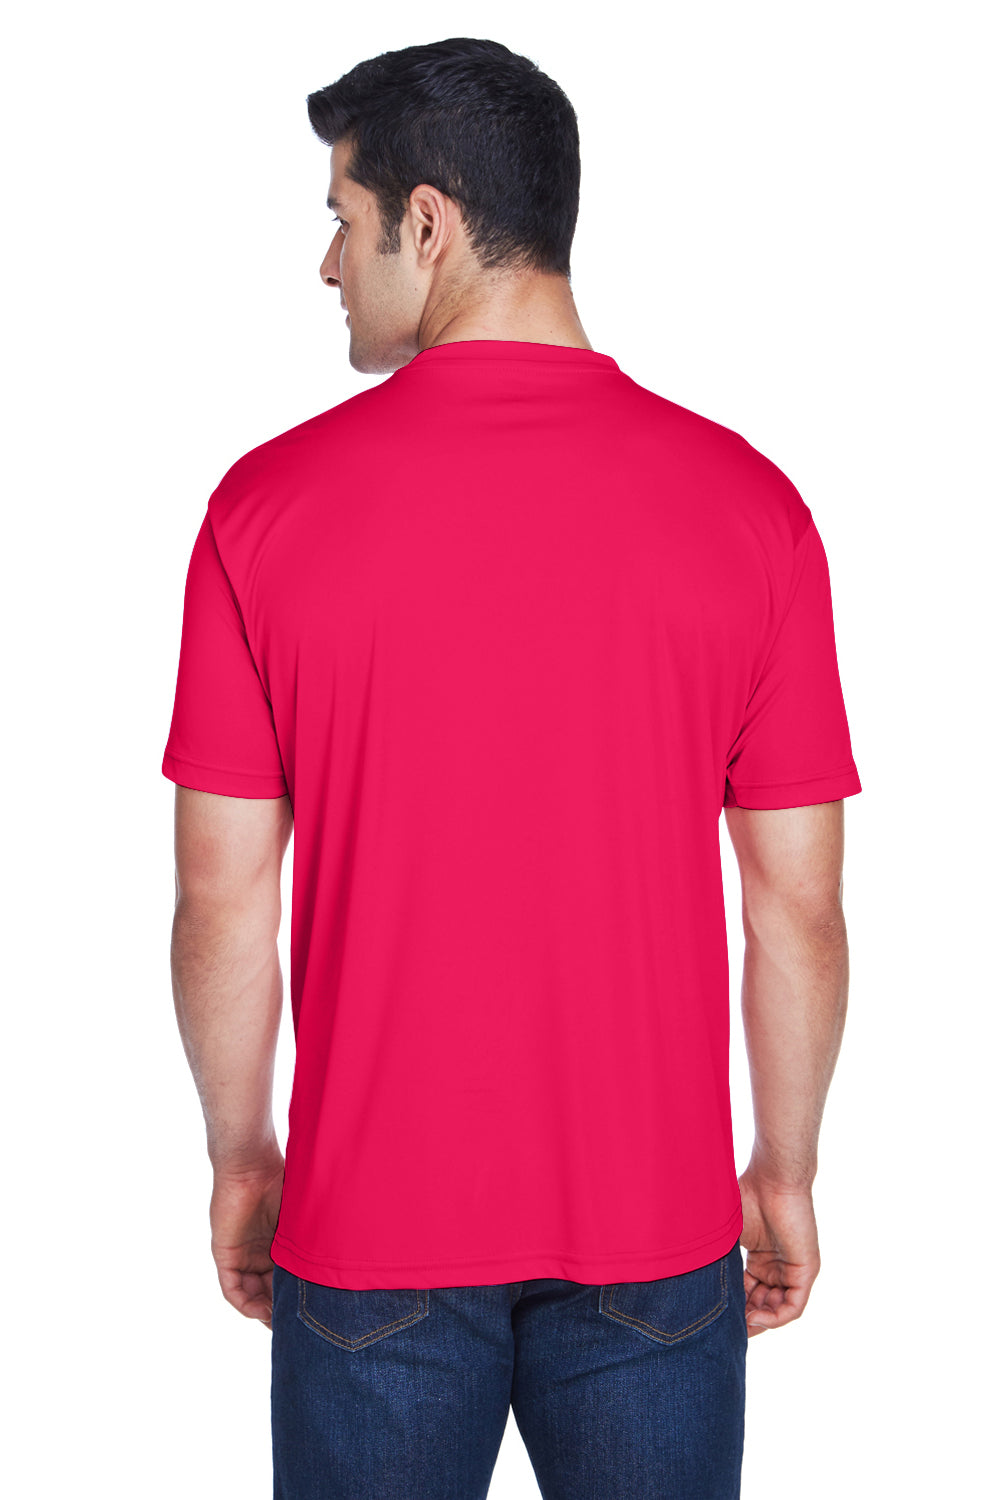 UltraClub 8420 Mens Cool & Dry Performance Moisture Wicking Short Sleeve Crewneck T-Shirt Red Back